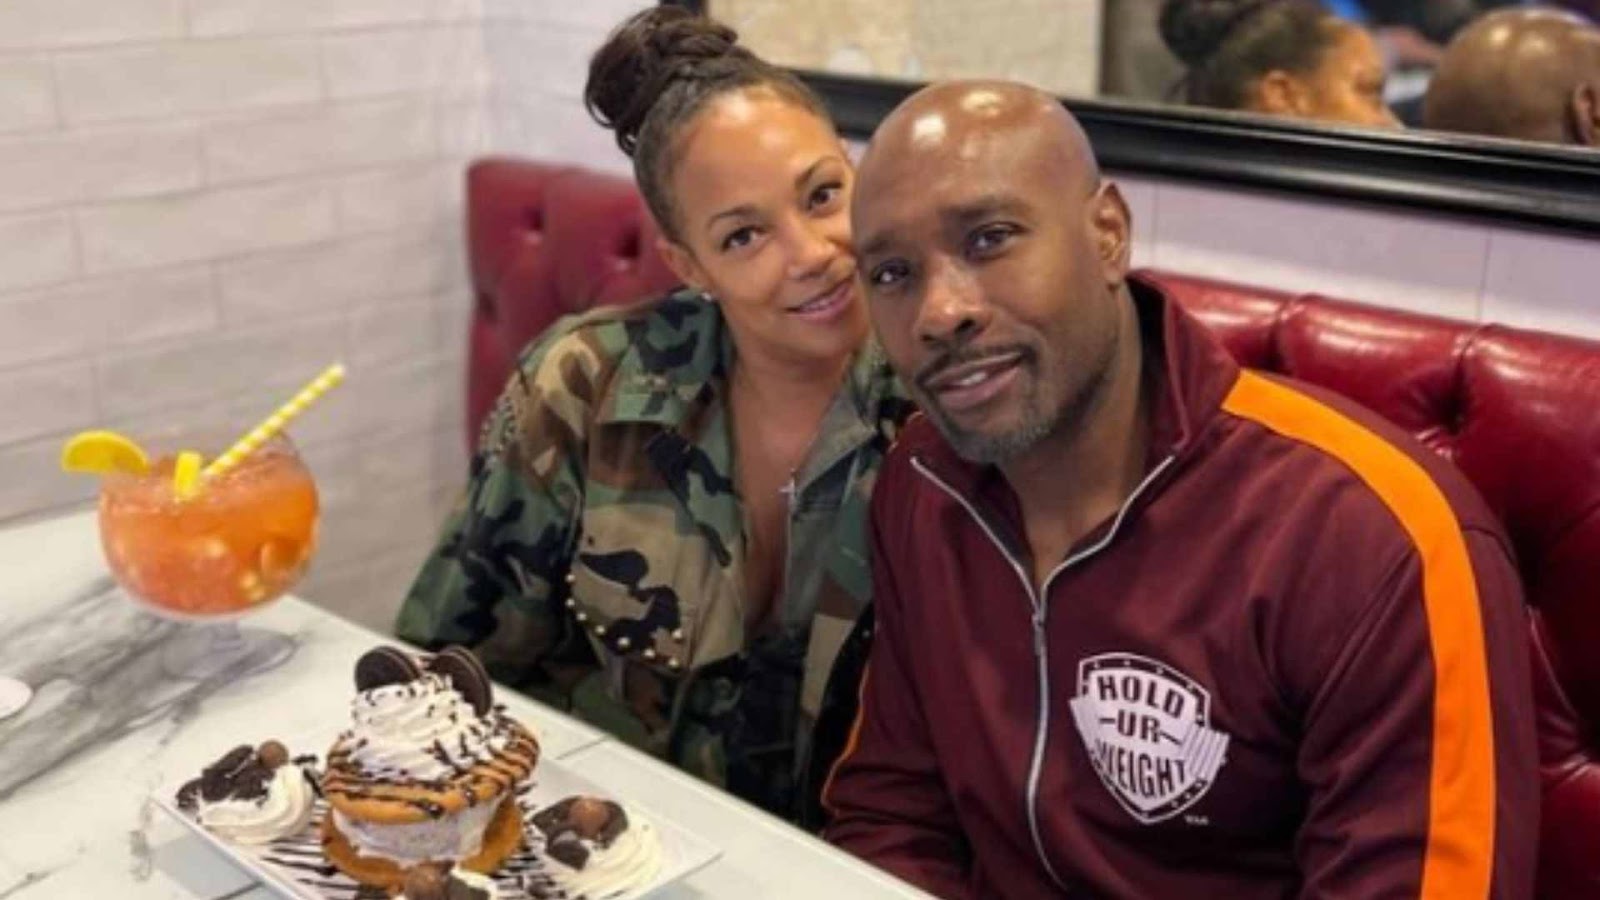 Personal Life of Morris Chestnut